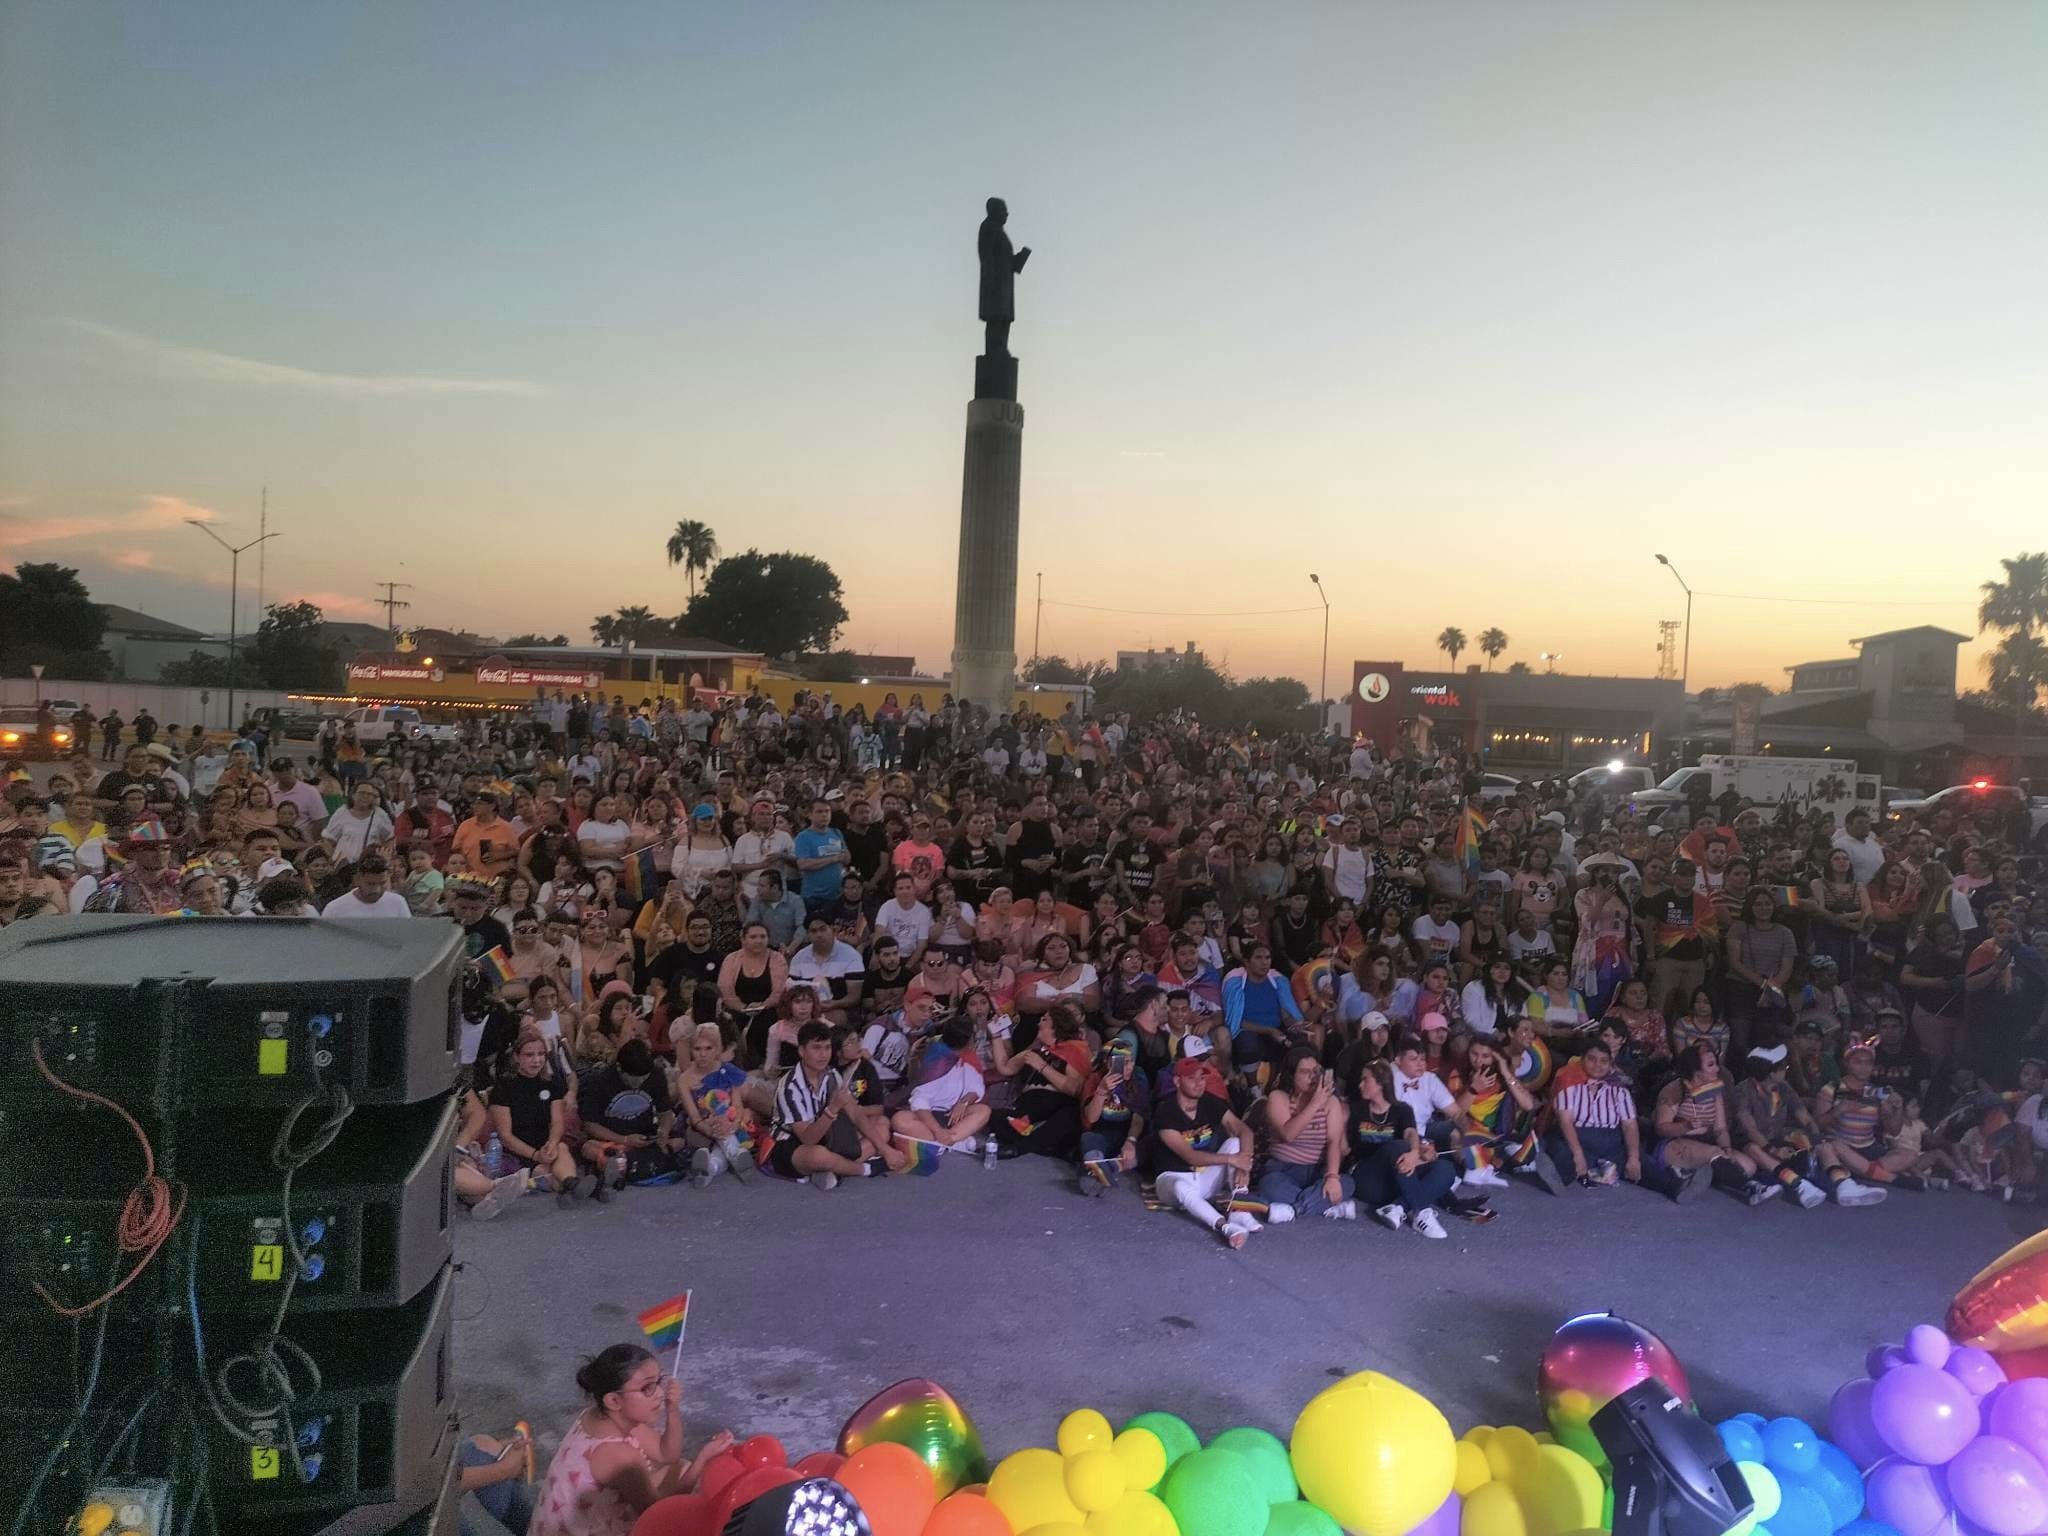 Crowds gathered for the entertainment after the gay pride march in Nuevo Laredo, Tamaulipas in June 2023